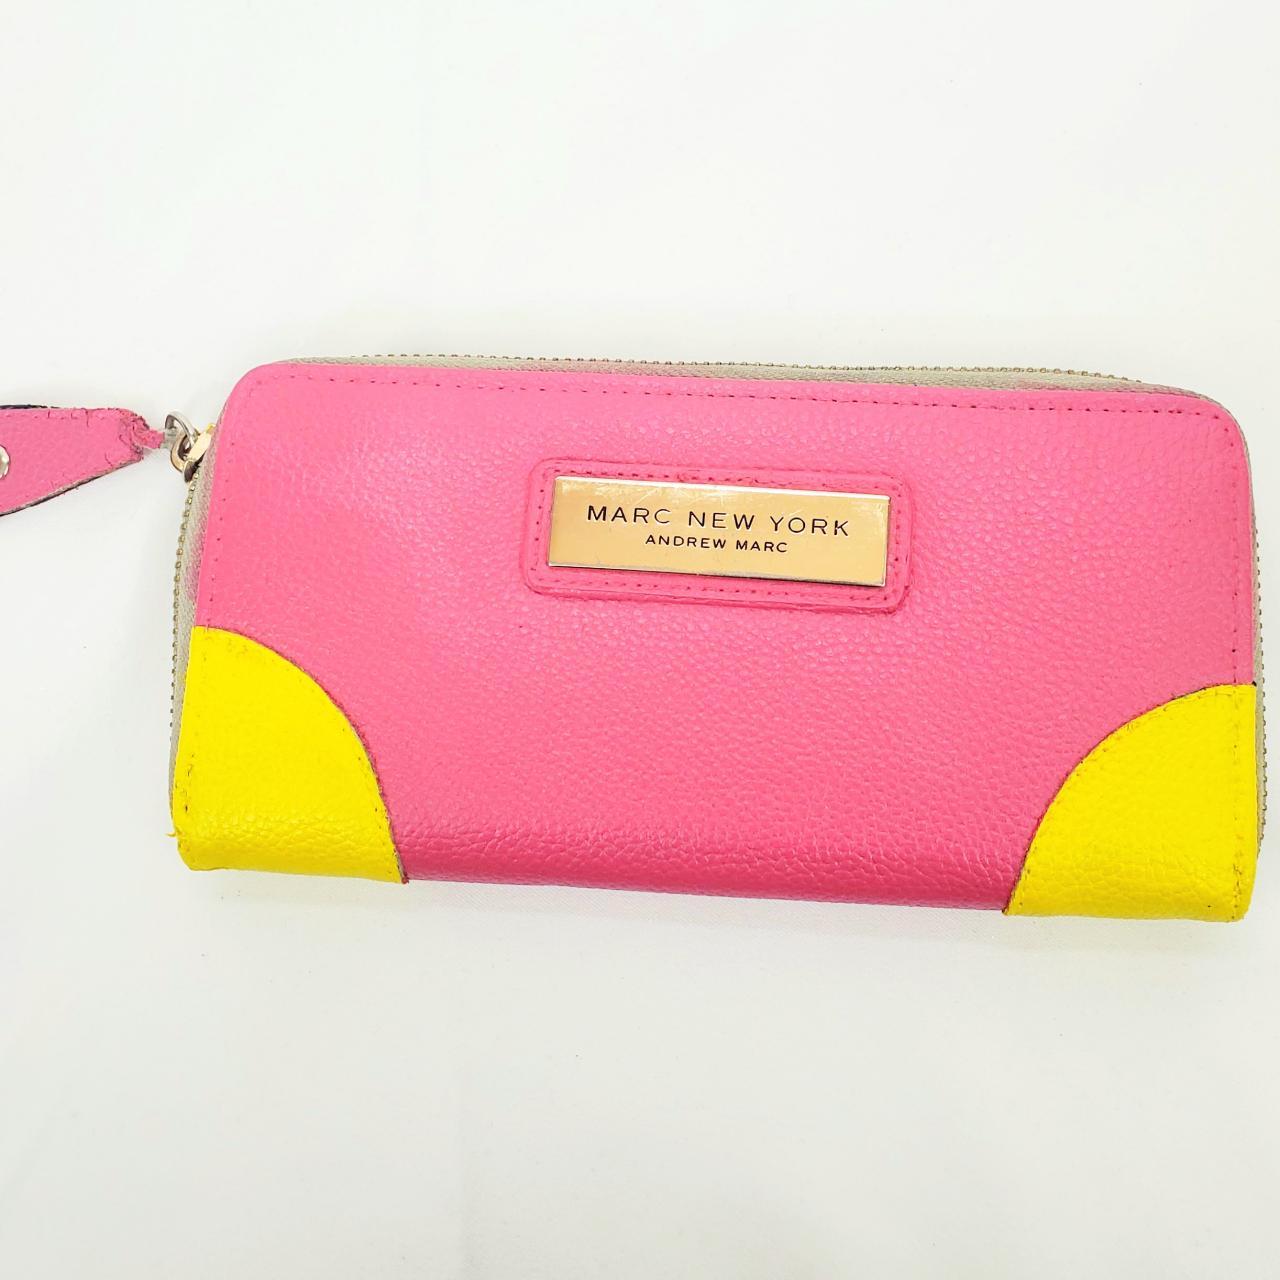 Andrew Marc Women's Pink and Yellow Bag | Depop